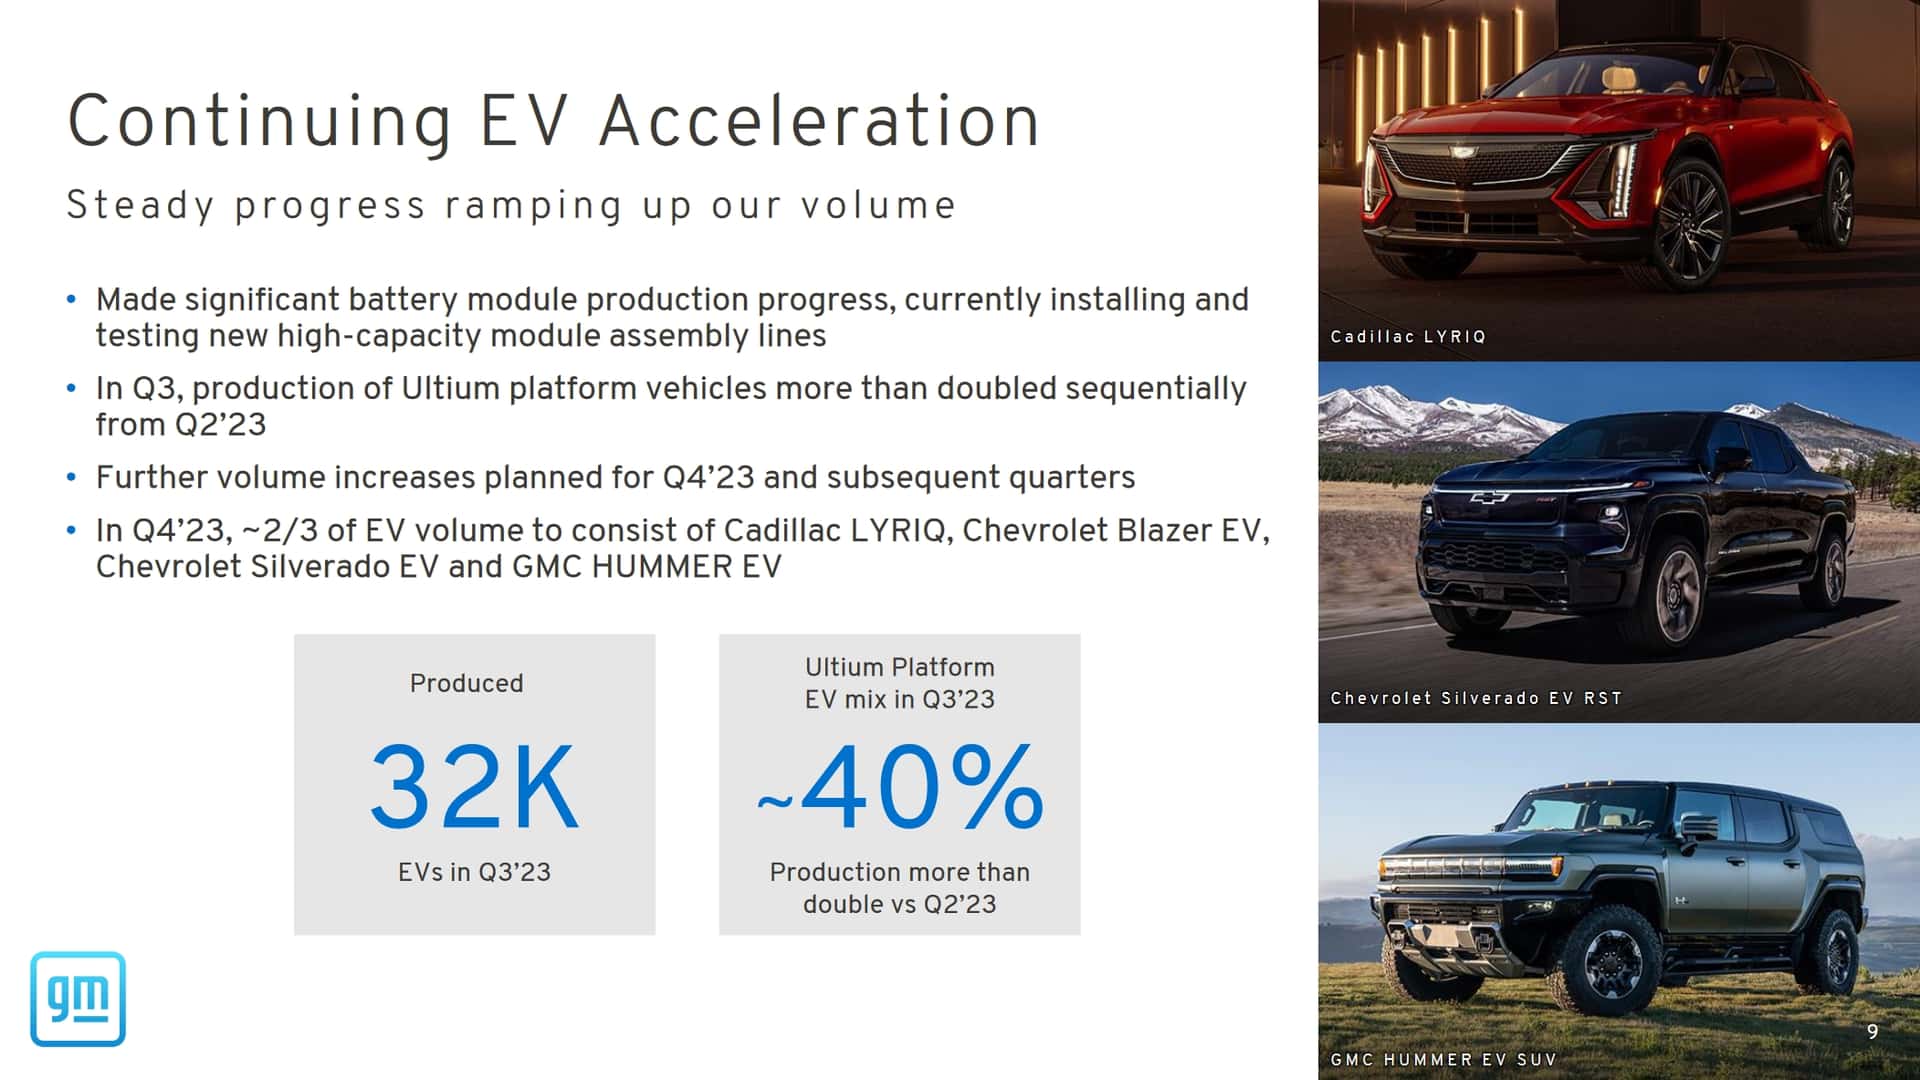 general motors ev sales might hit a record of over 30,000 in q4